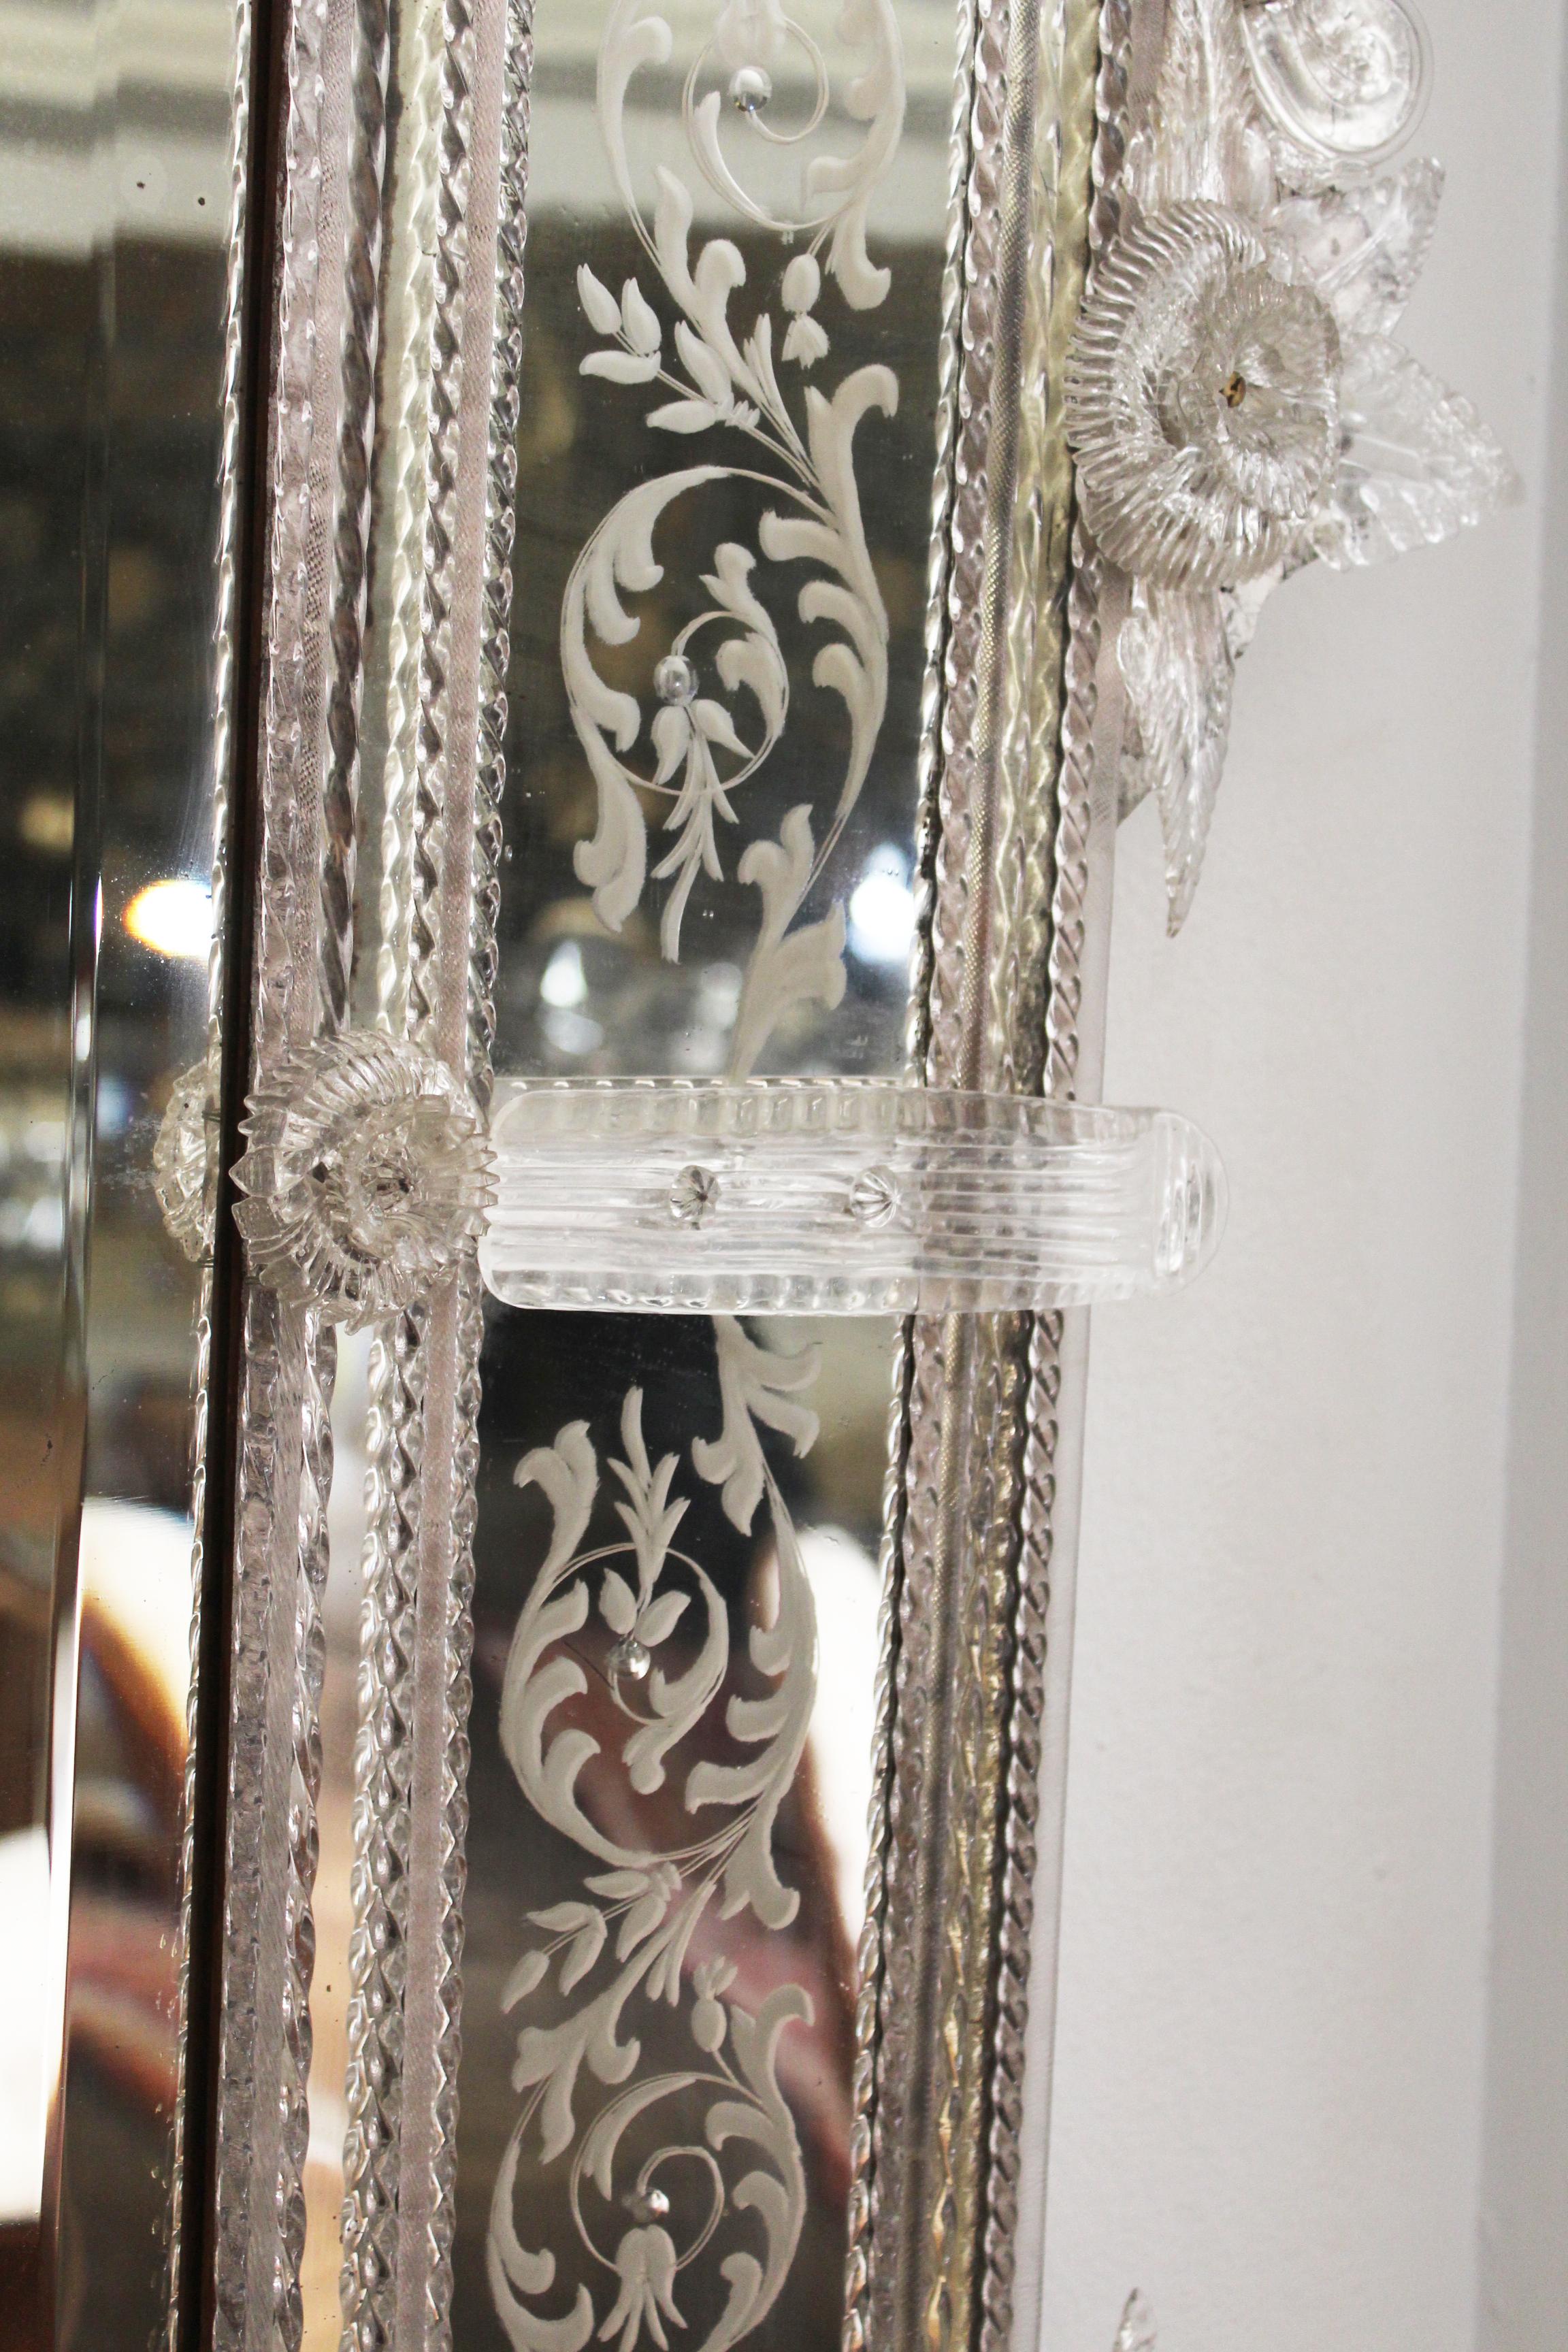 19th Century Venetian Mirror Profusely Decorated with Floral Motifs 3